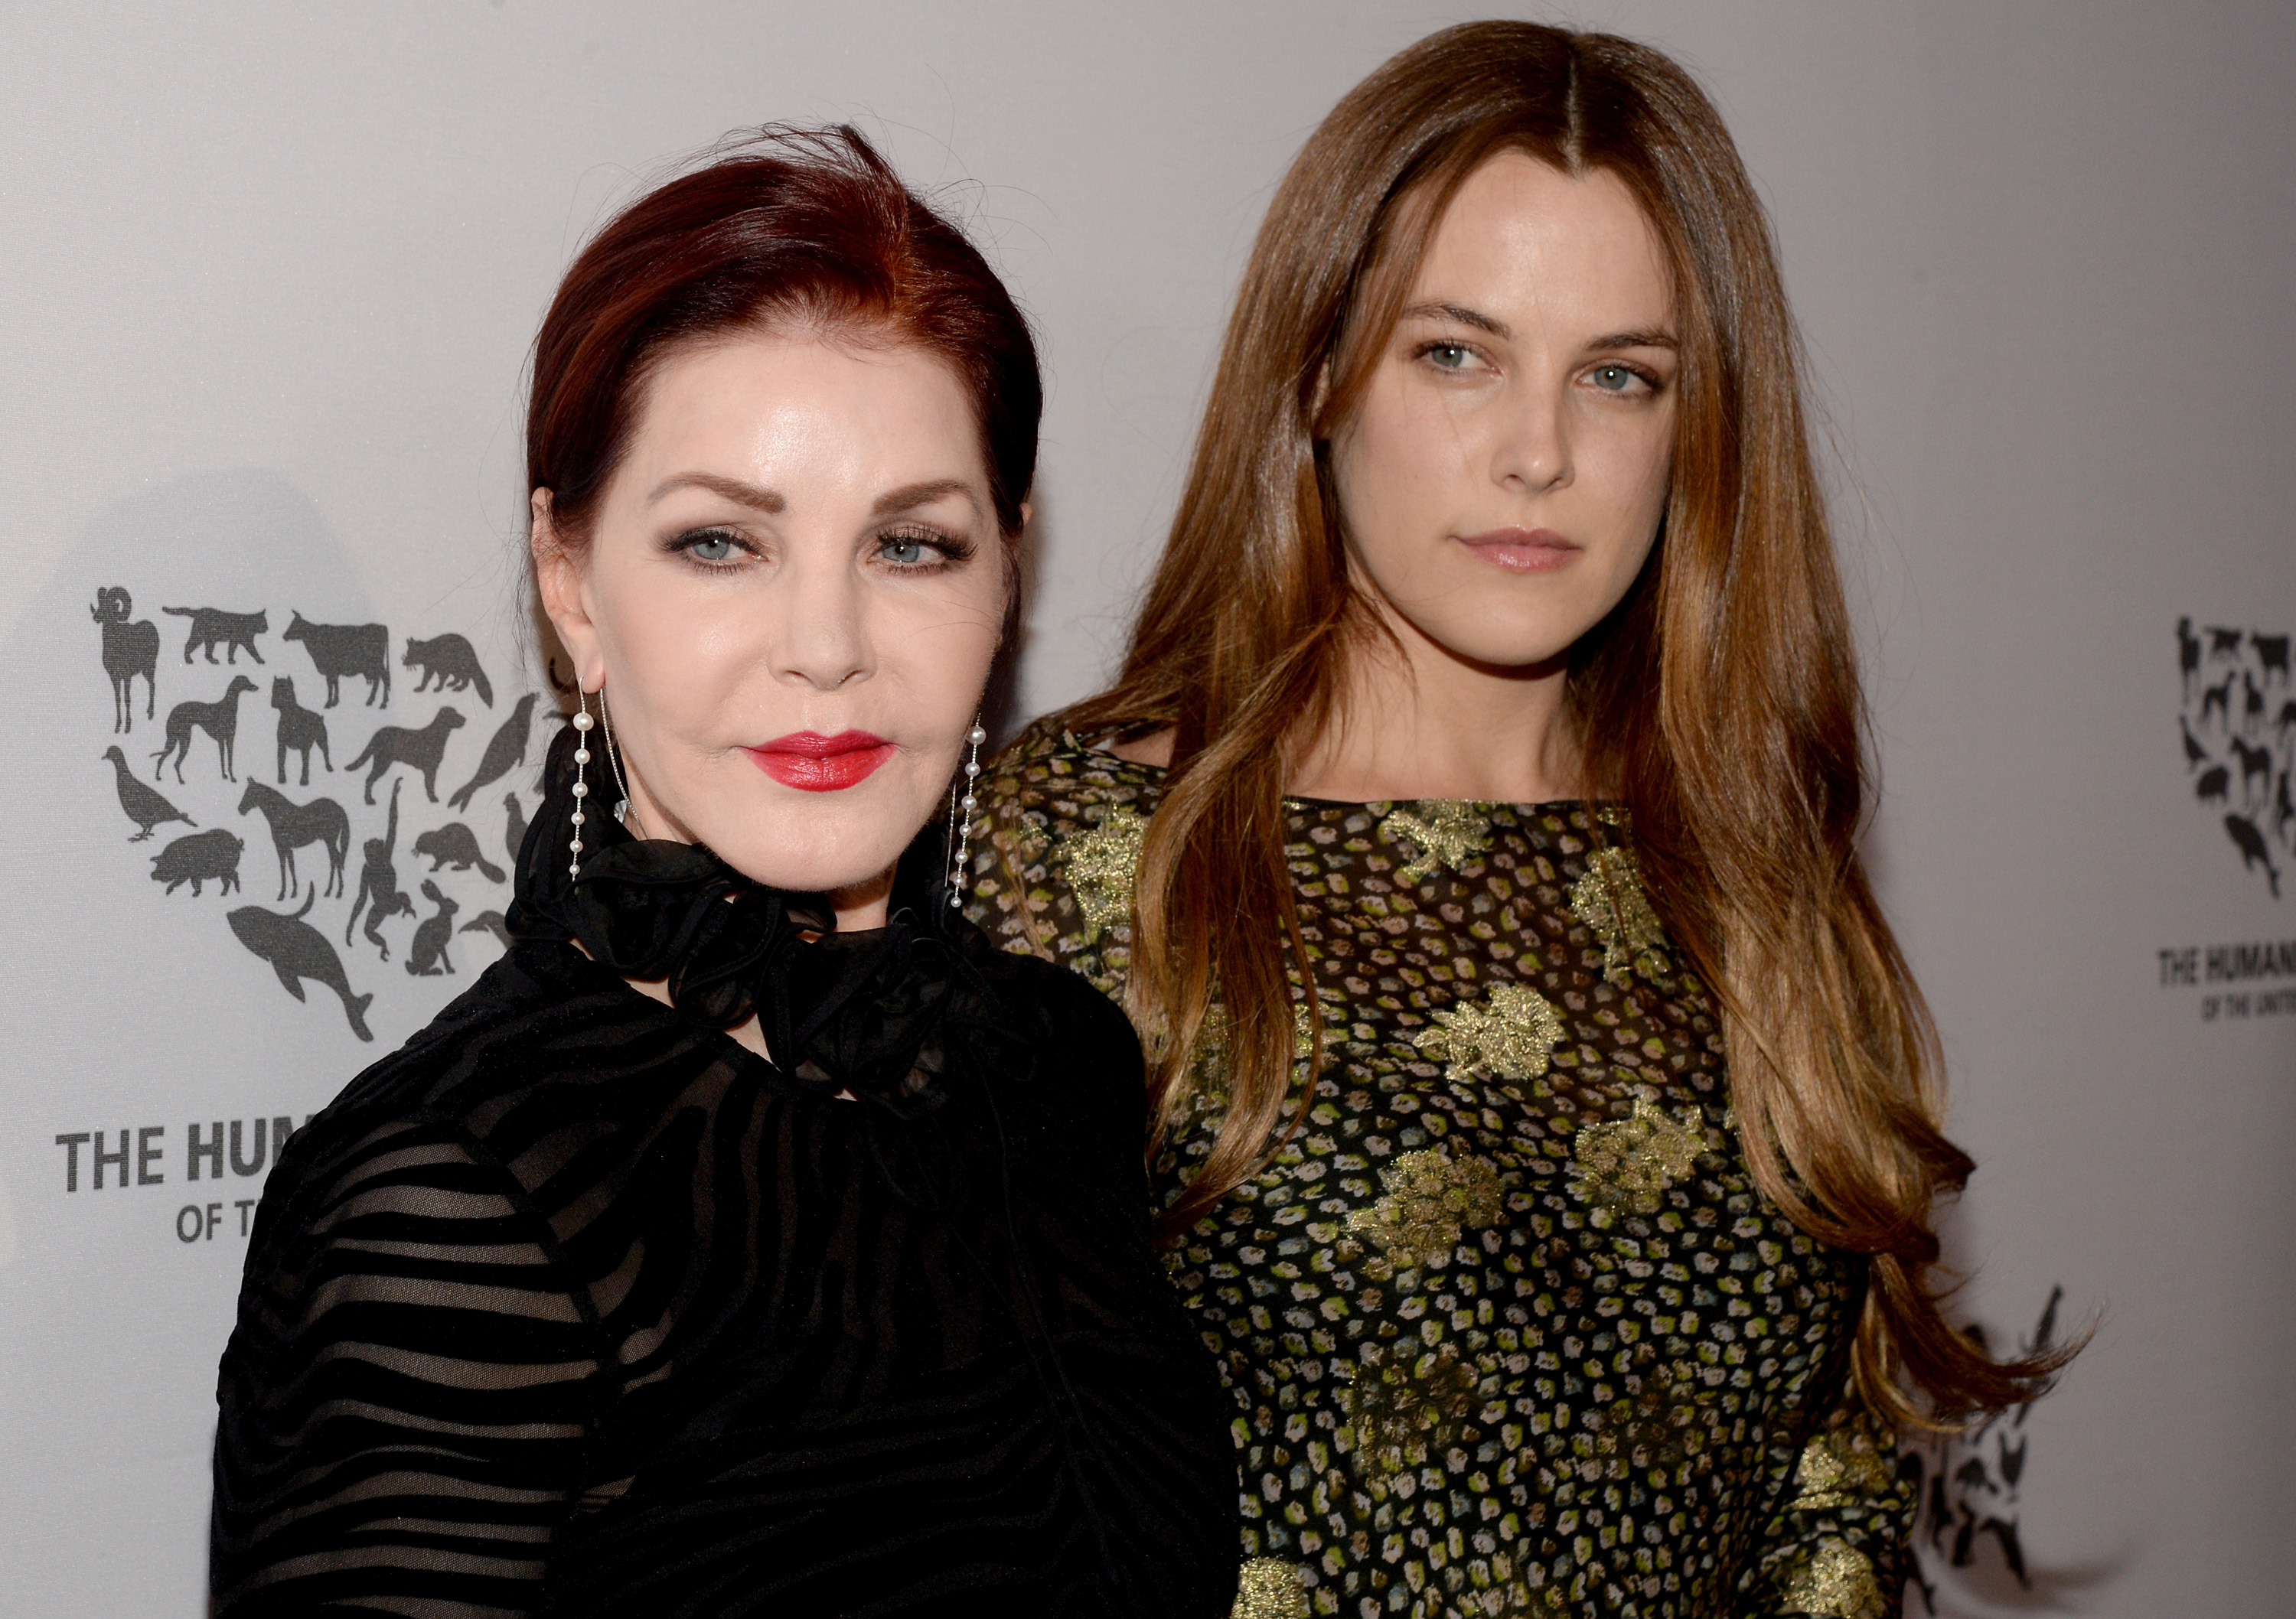 Priscilla Presley and Riley Keough attend The Humane Society of the United States' to the Rescue Gala at Paramount Studios, on May 7, 2016, in Hollywood, California. | Source: Getty Images